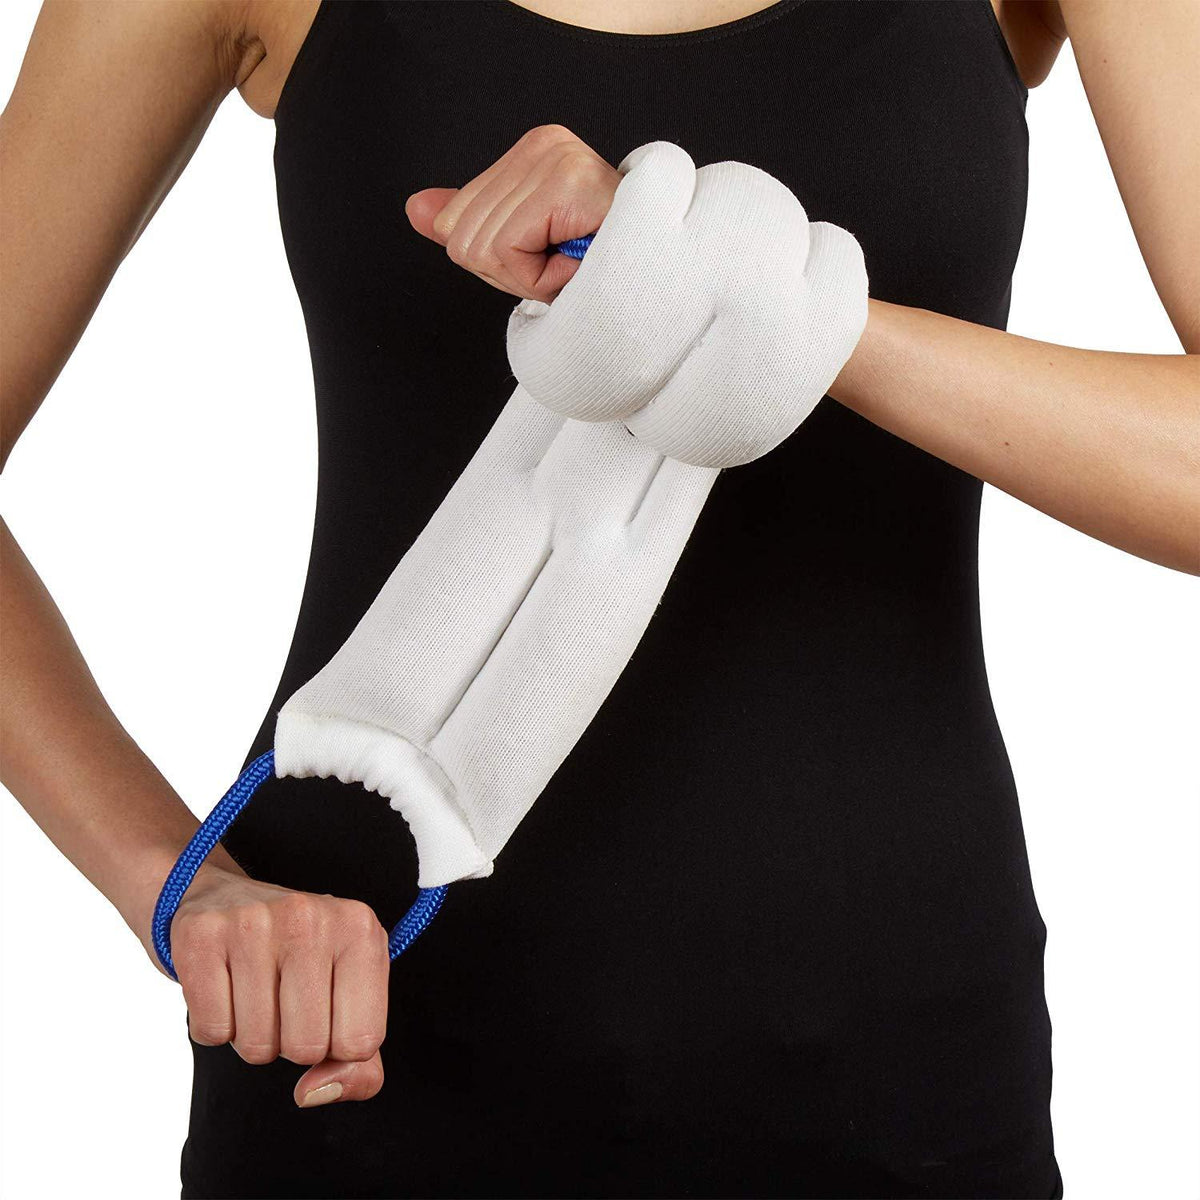 A woman with a hot/cold wrap around her wrist